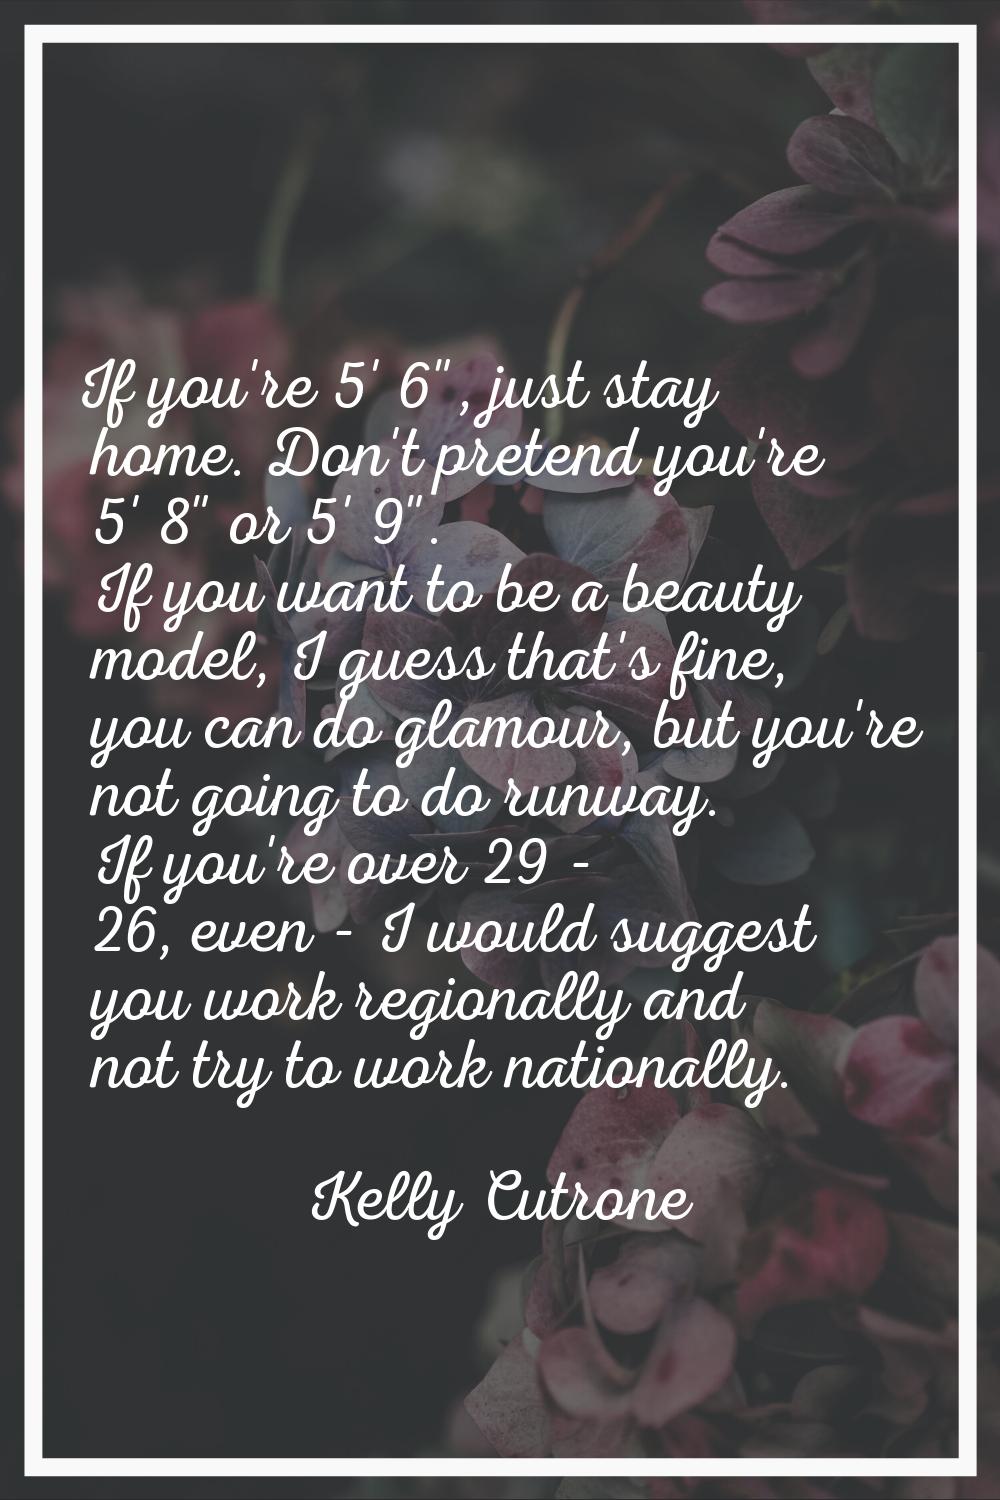 If you're 5' 6", just stay home. Don't pretend you're 5' 8" or 5' 9". If you want to be a beauty mo